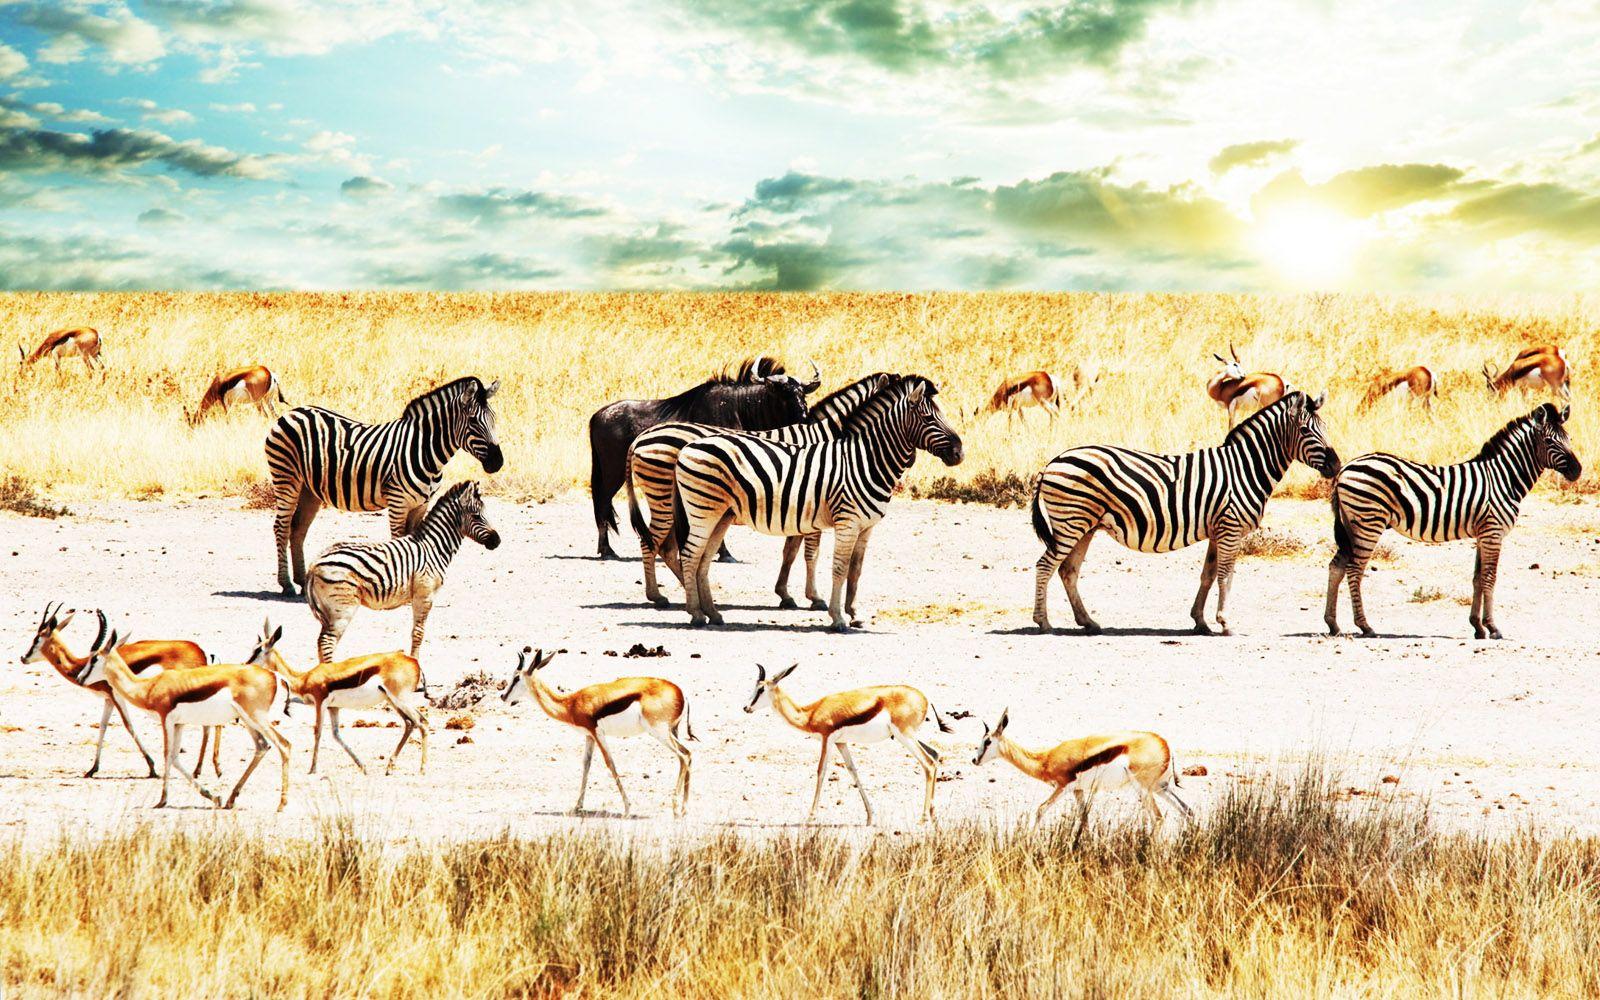 Central Wallpaper Colors of Nature Zebras 2K Wallpapers